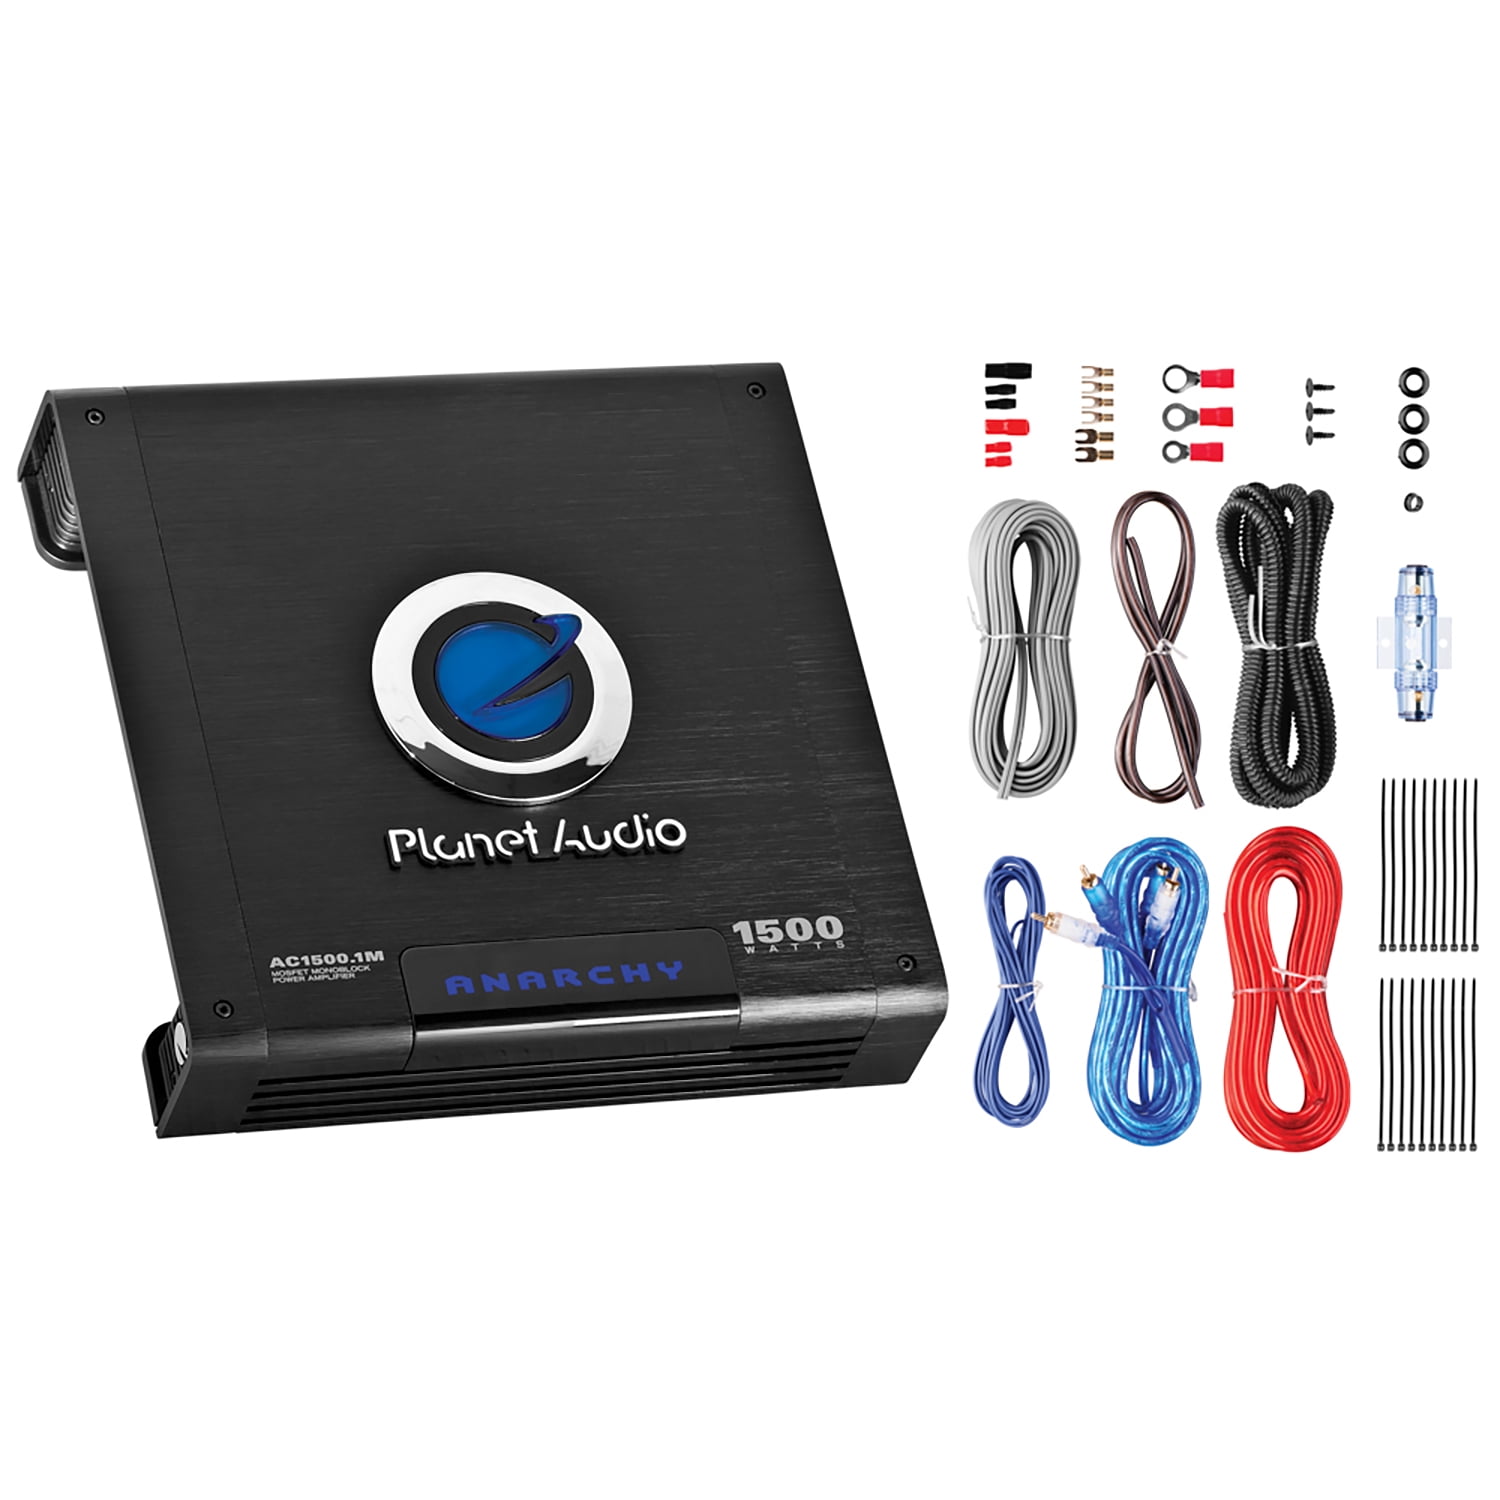 Planet Audio AC1500MK Anarchy Series Car Audio Amplifier and 8 Gauge Wiring  Kit - 1500 High Output, Monoblock, Class AB, 2/4 Ohm, High/Low Level  Inputs, Low Pass Crossover, For Stereo and Subwoofer - Walmart.com  Planet Audio Amp Wiring Diagram    Walmart